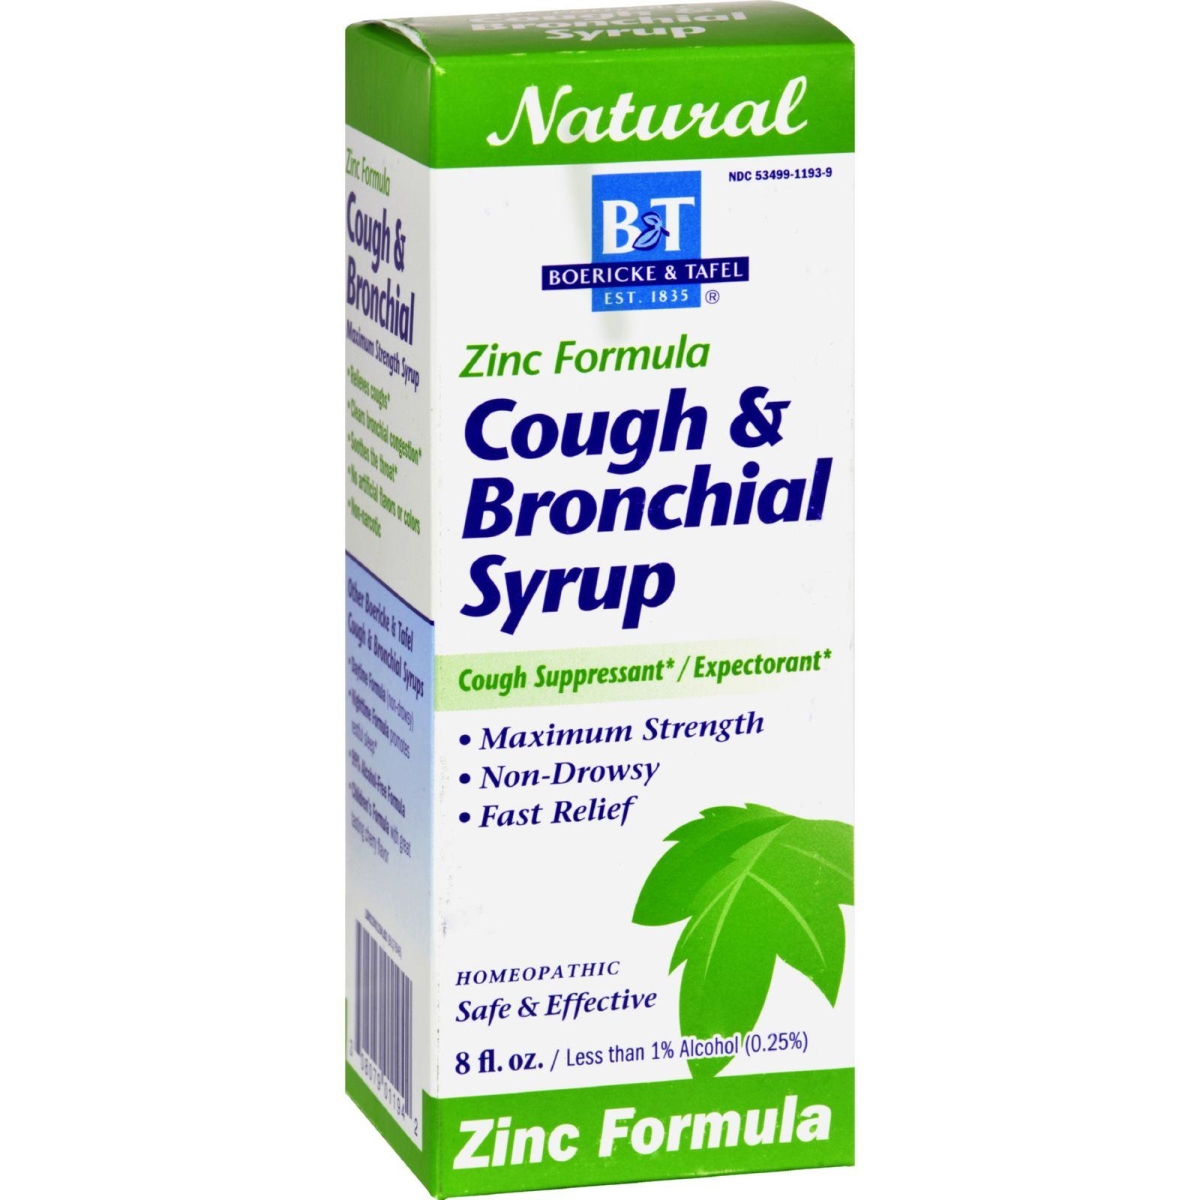 Picture of Boericke And Tafel HG0648949 8 fl oz Cough & Bronchial Syrup with Zinc